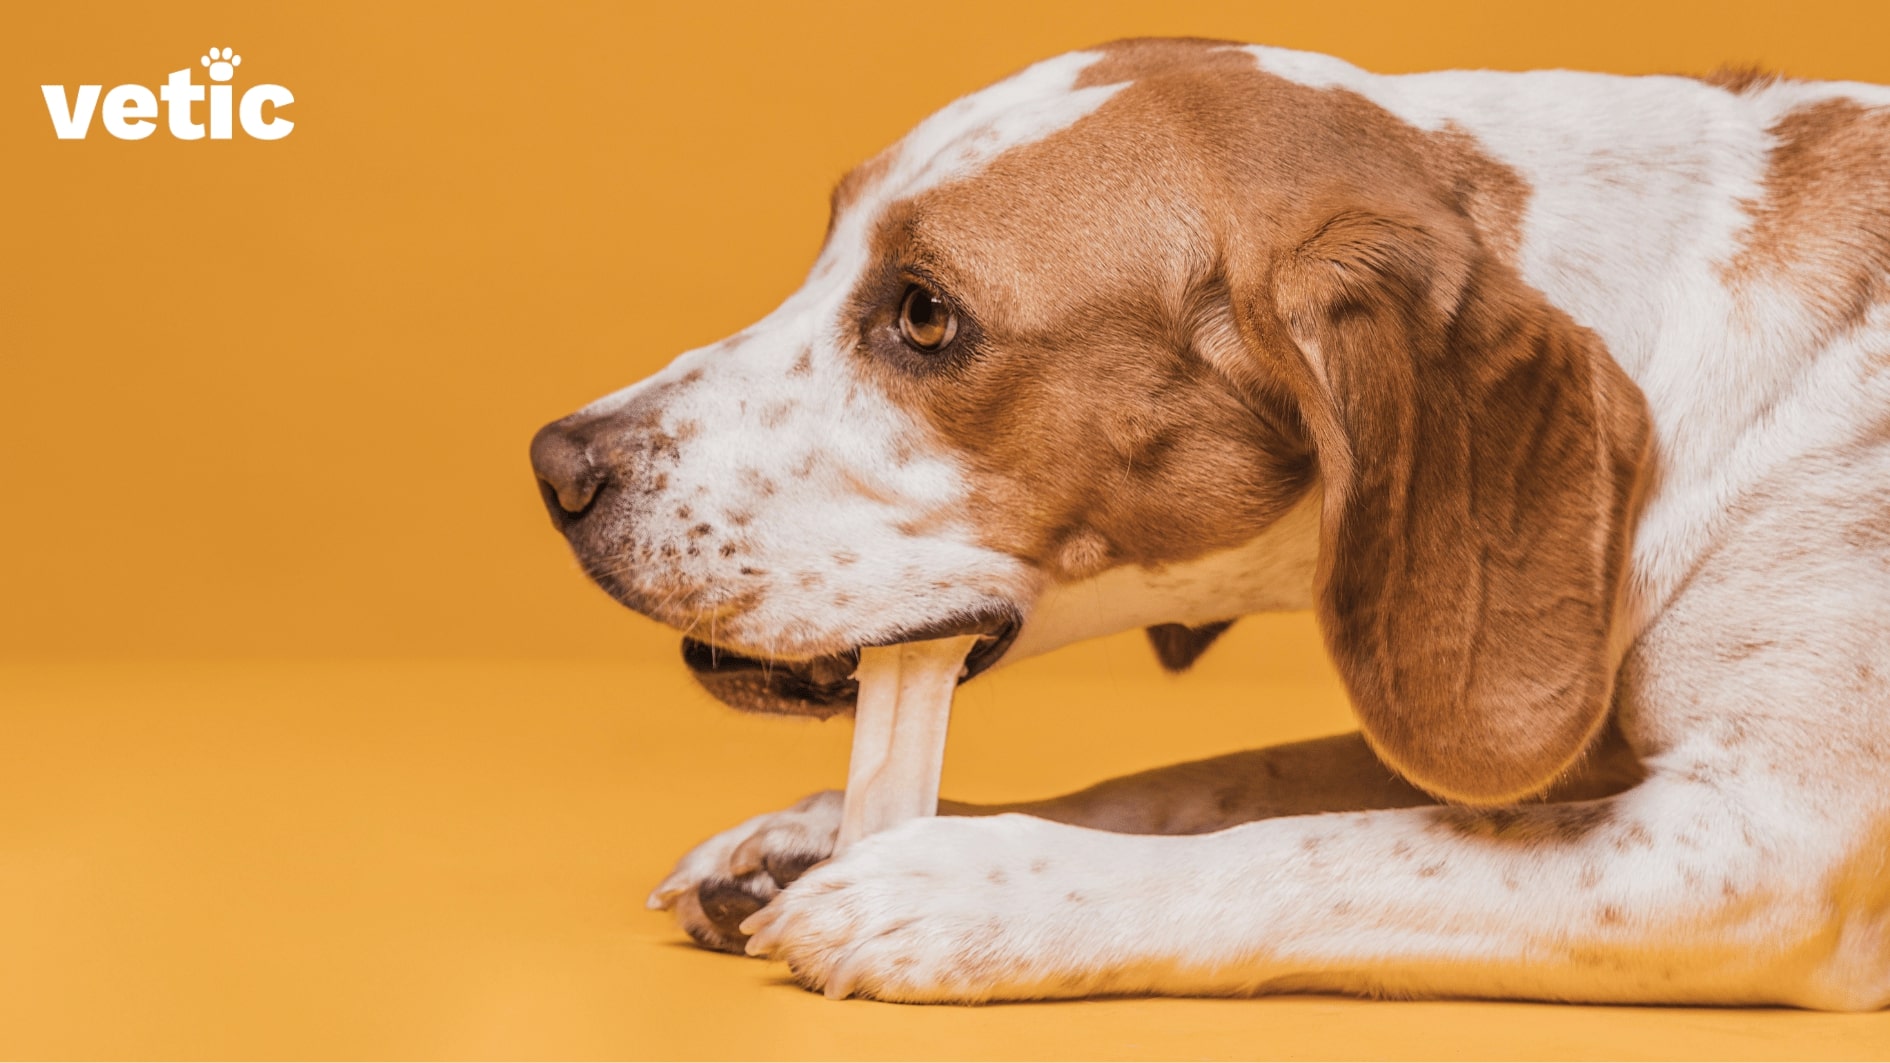 a small-breed dog holding a chew-bone between the front paws and gnawing on it. Gnawing can remove plaque and improve dog's teeth health.